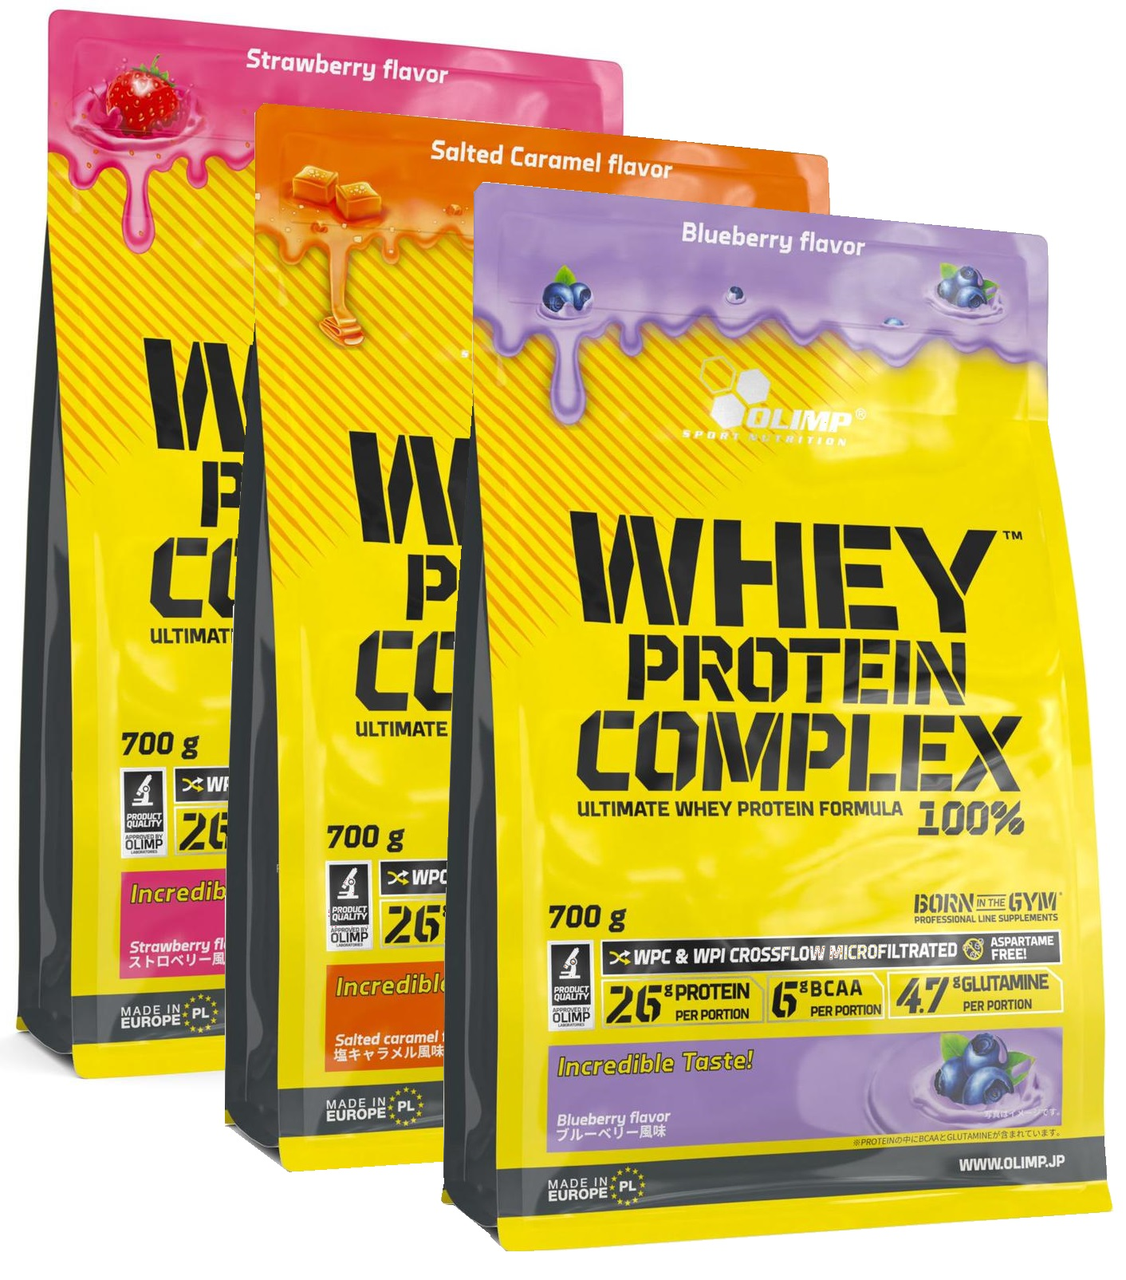 Протеин Whey Protein Complex 100%, 700 g, Olimp Nutrition Peanut butter - фото 1 - id-p116515650